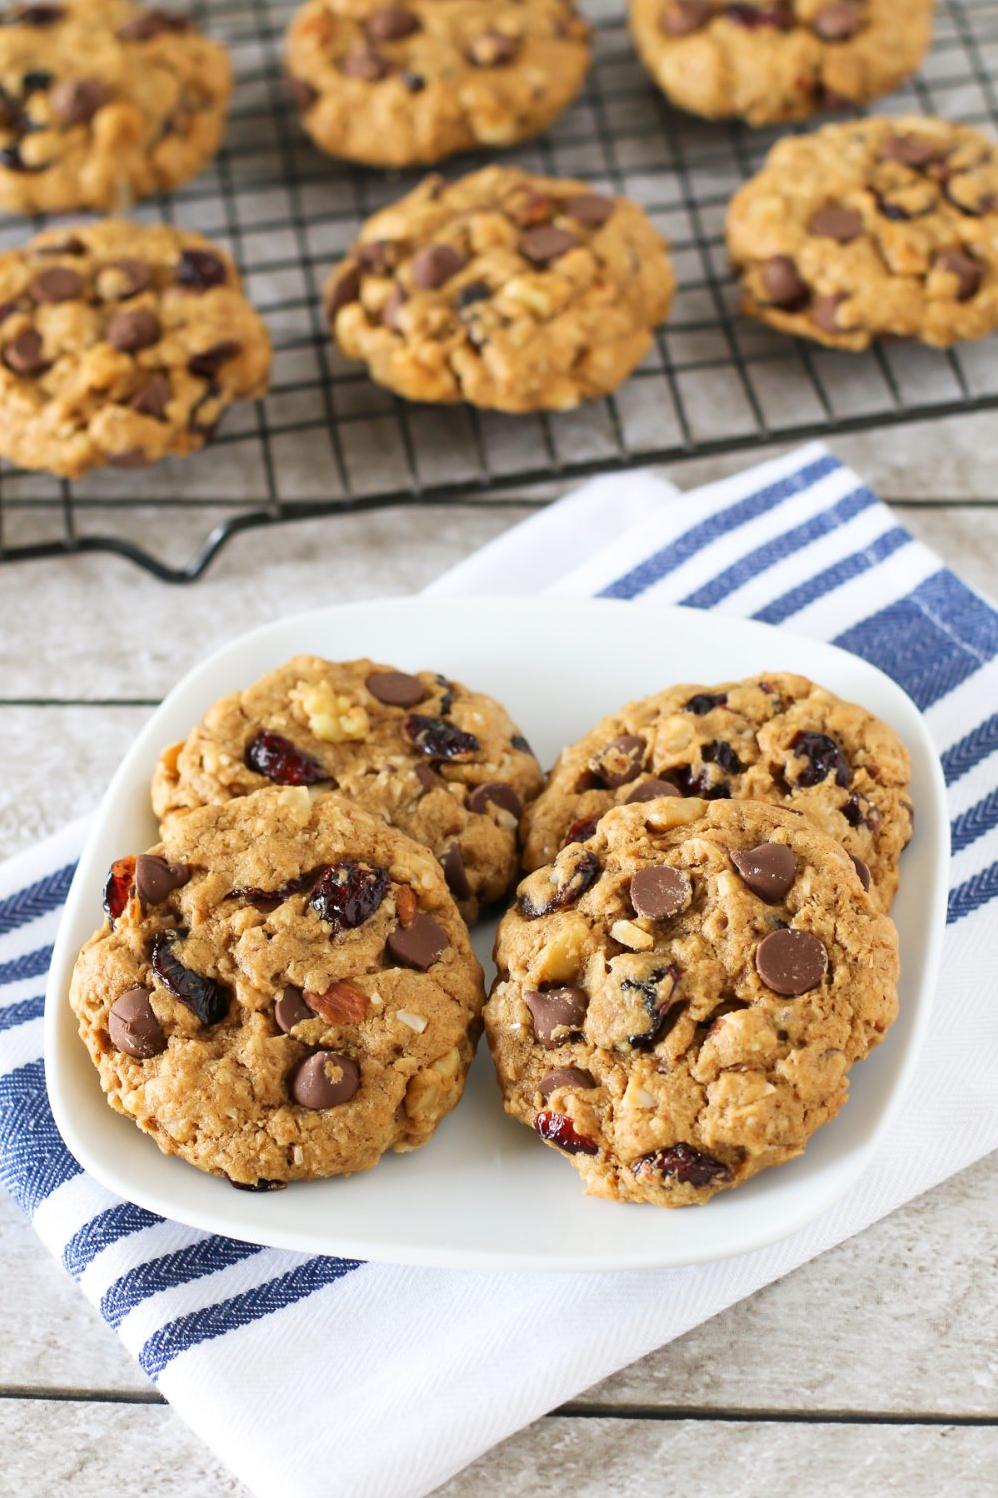  These cookies make a great healthy addition to your kids' lunchboxes or as an after-school snack.